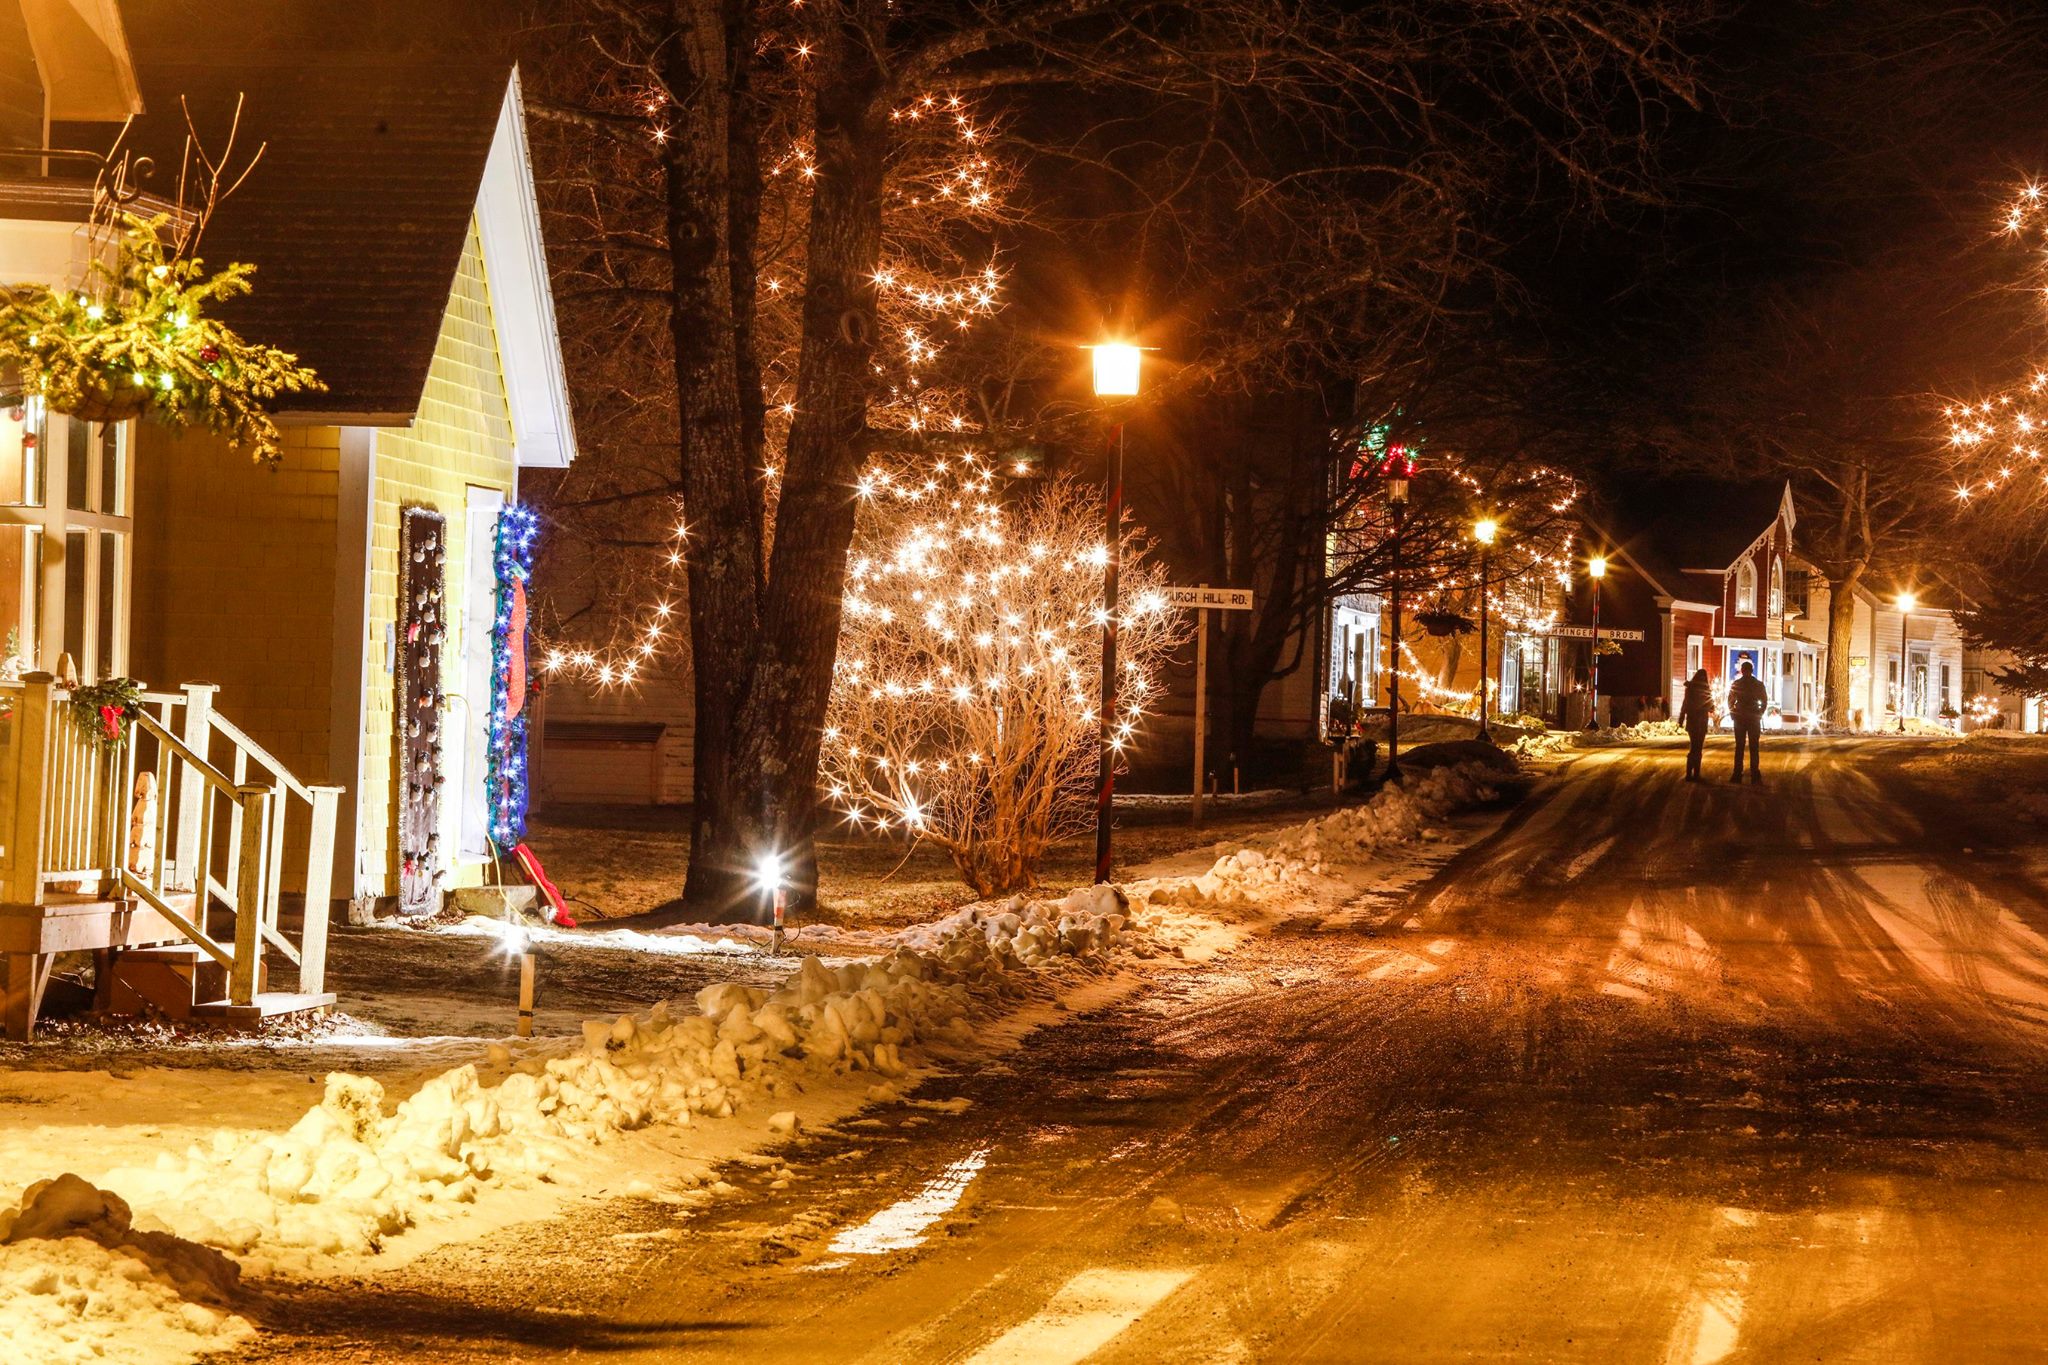 In the News Old Fashioned Christmas at Sherbrooke Village